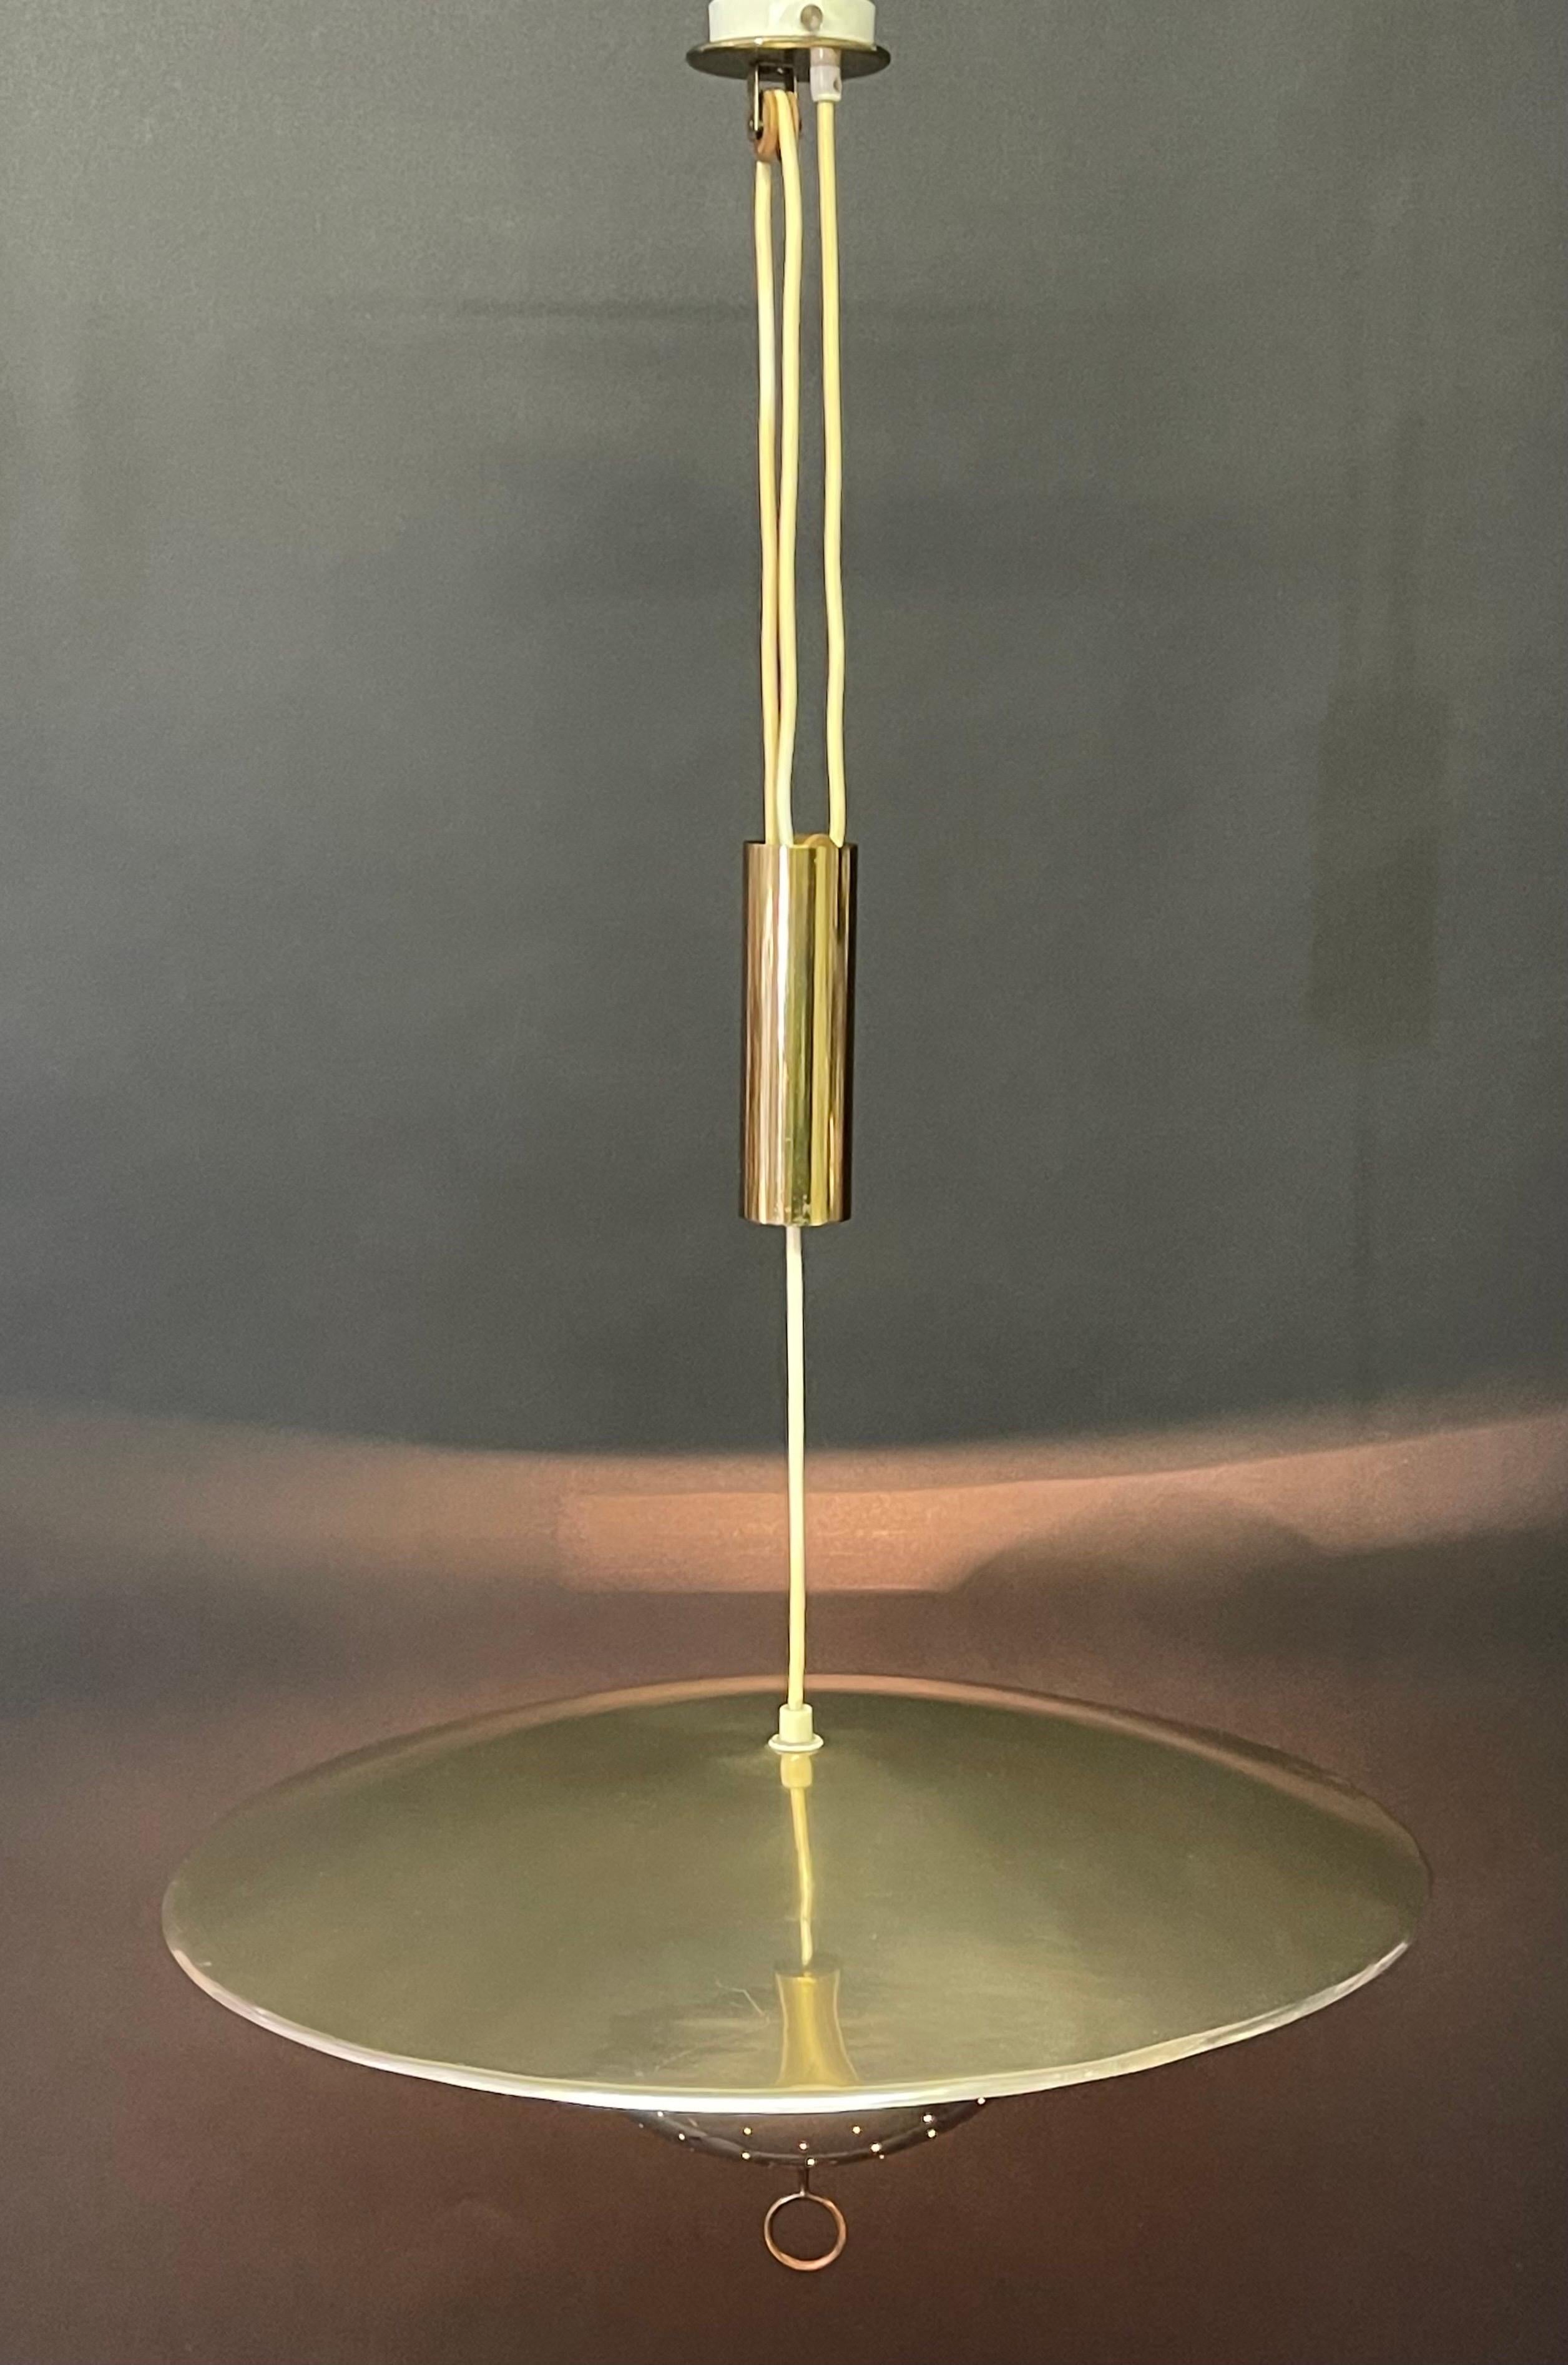 Lacquered Very Rare Suspension Lamp by Gino Sarfatti for Arteluce, Italy, circa 1950s For Sale